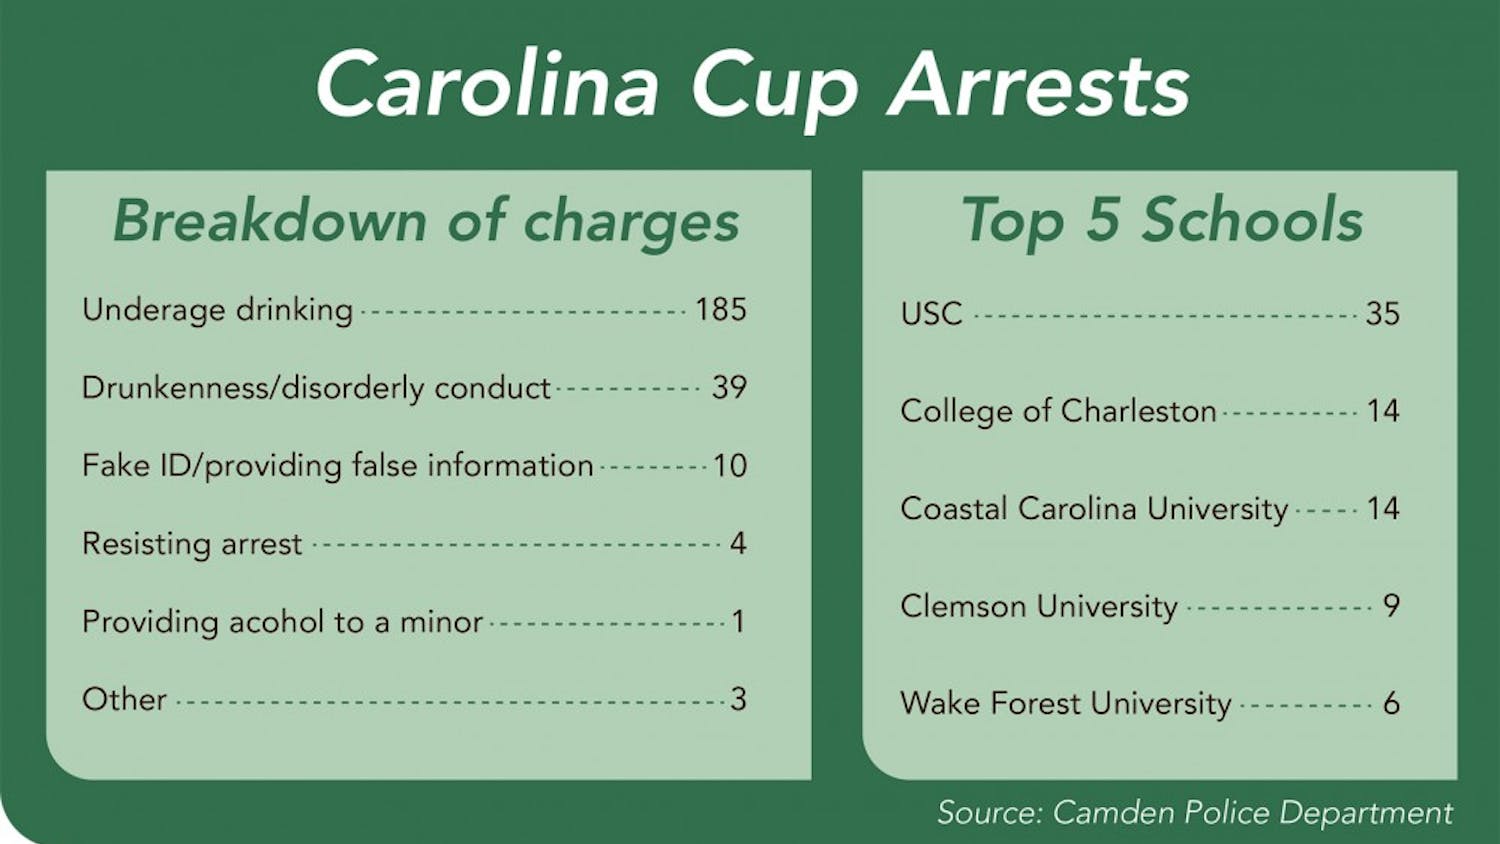 	USC had the most students arrested out of the colleges represented at Carolina Cup Saturday.